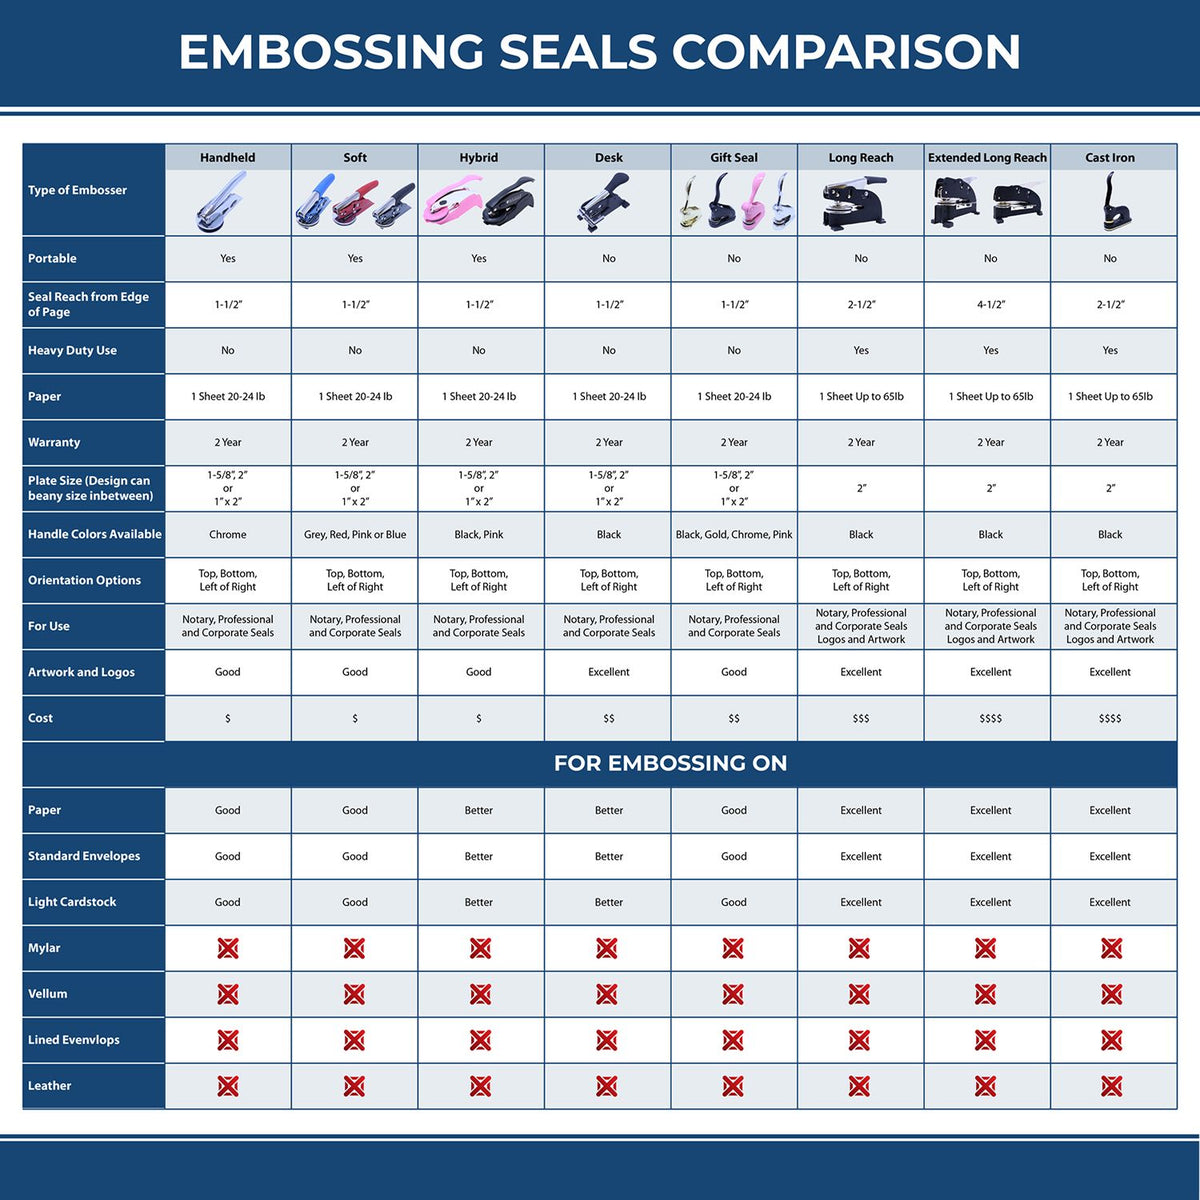 A comparison chart for the different types of mount models available for the Soft New York Professional Engineer Seal.